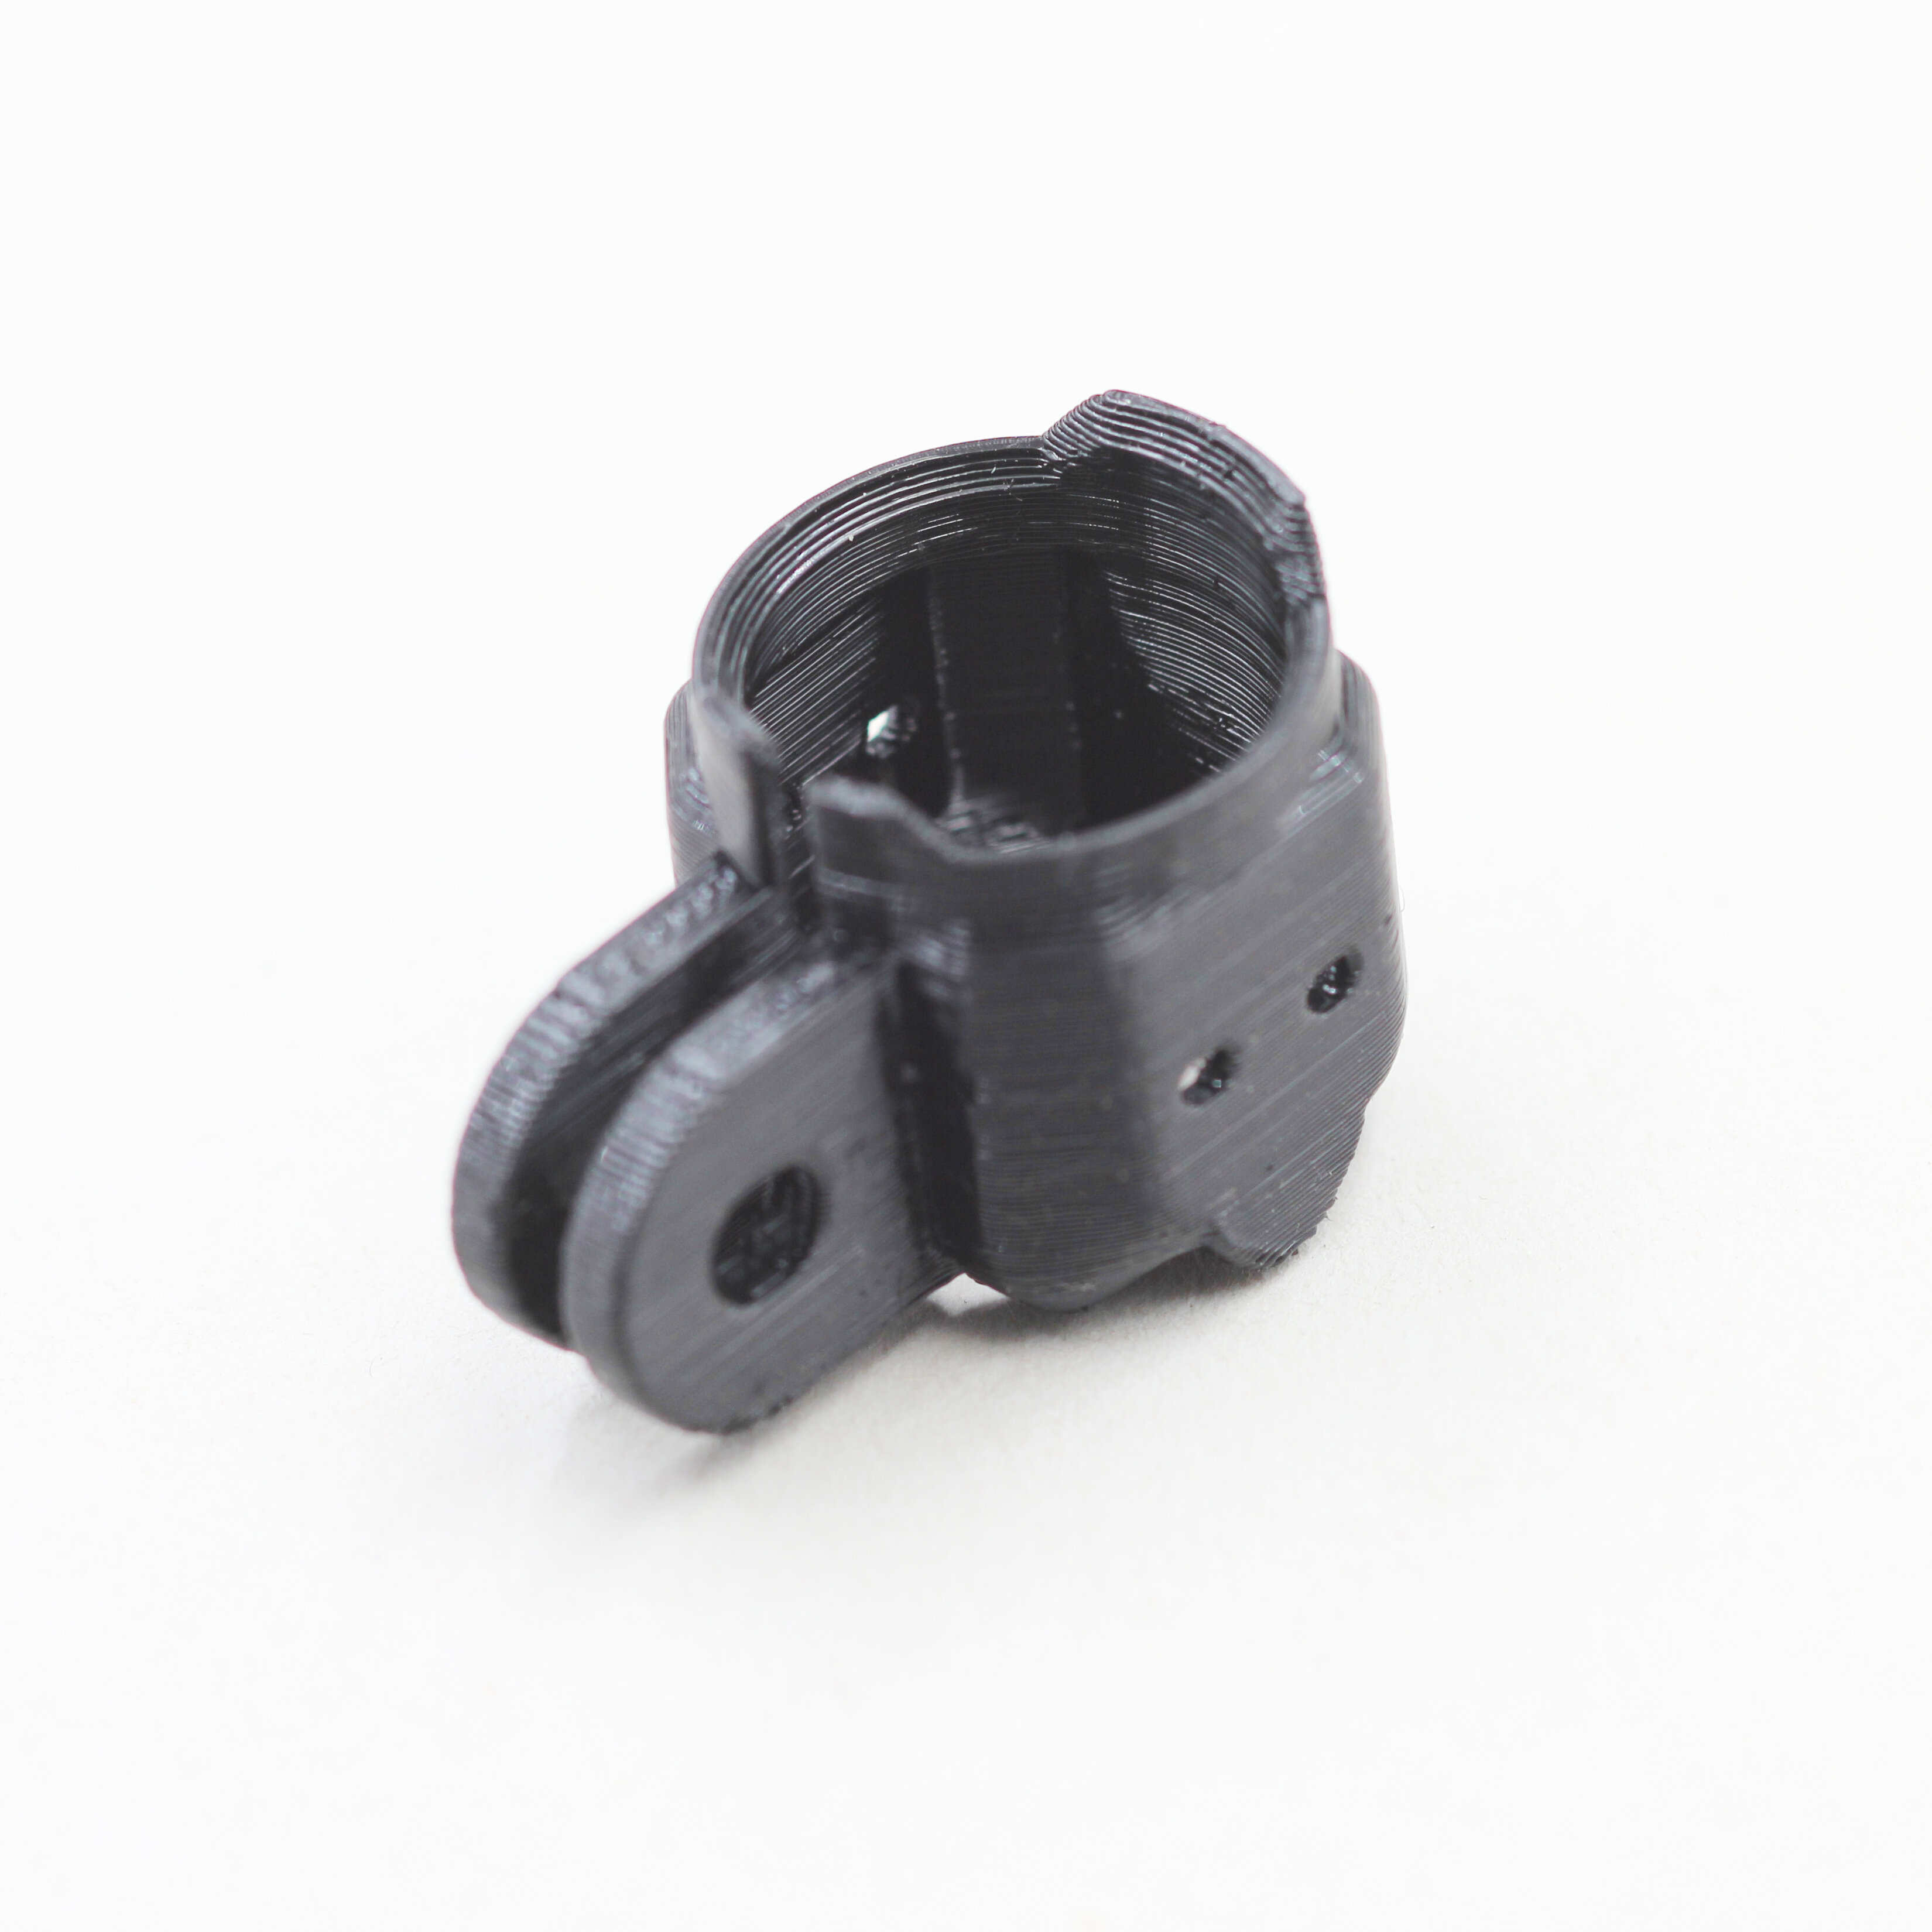 QY3D M5 Mount for DJI O3 Camera